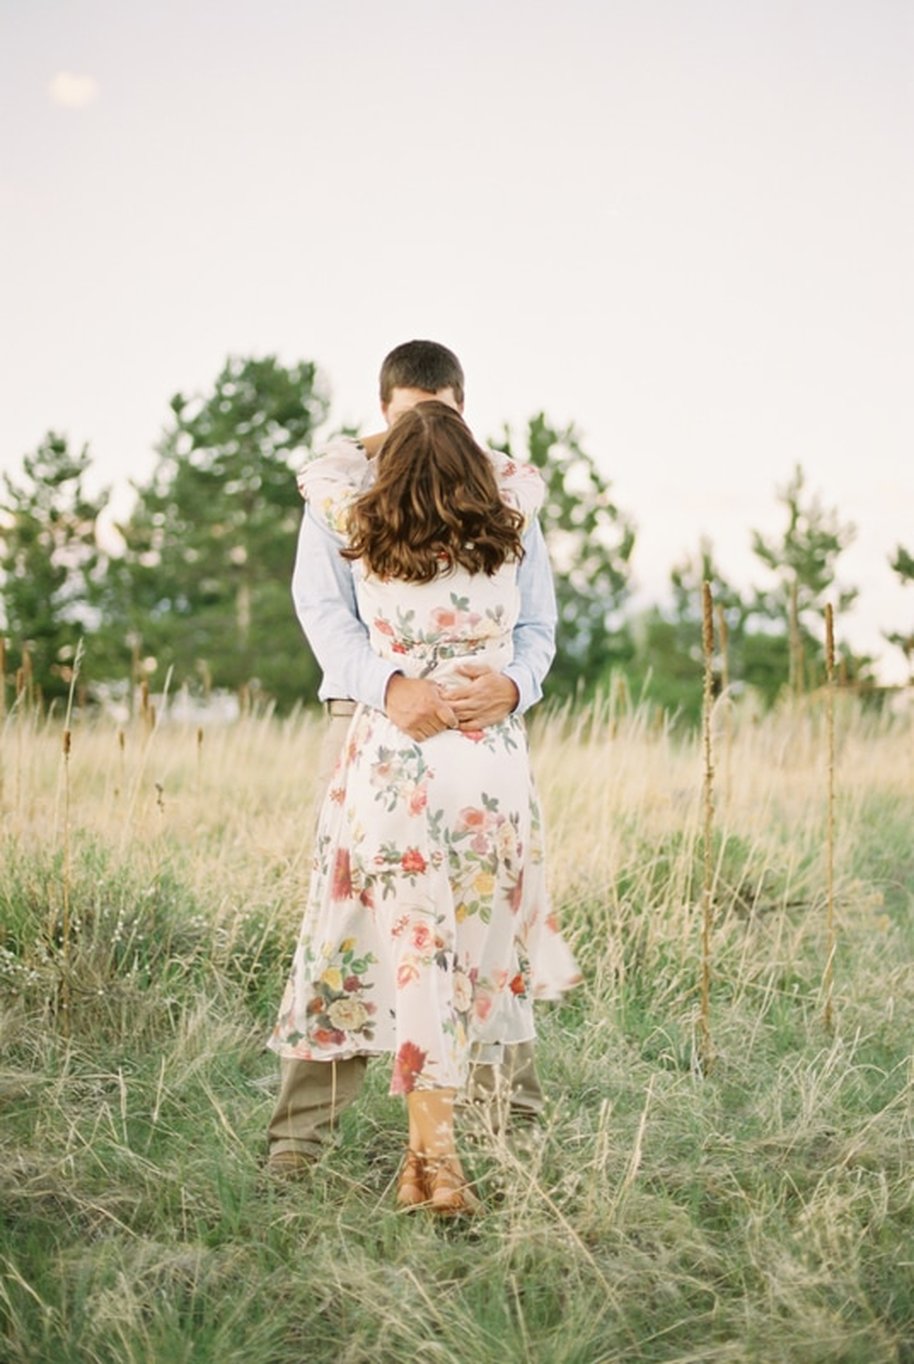 Romantic Rolling Hills with Mountains Engagement Session Photos